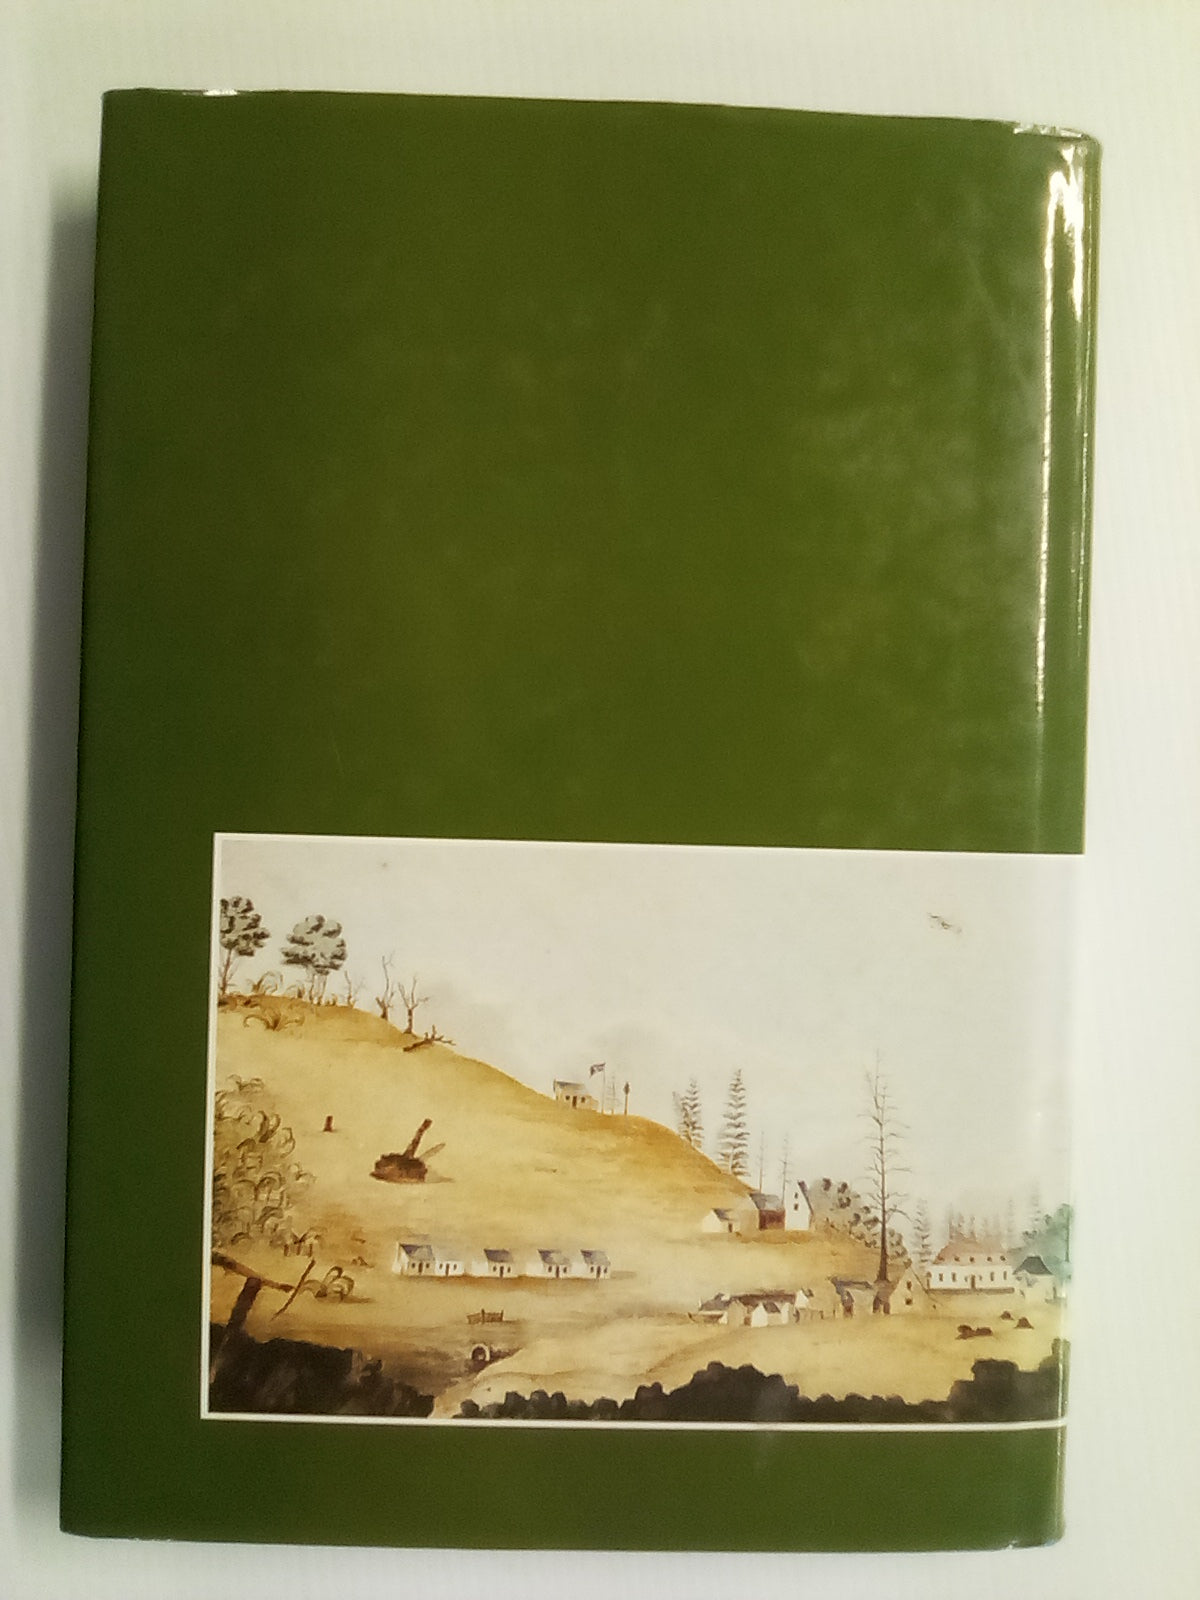 Norfolk Island and its First Settlement 1788-1814 by Raymond Nobbs